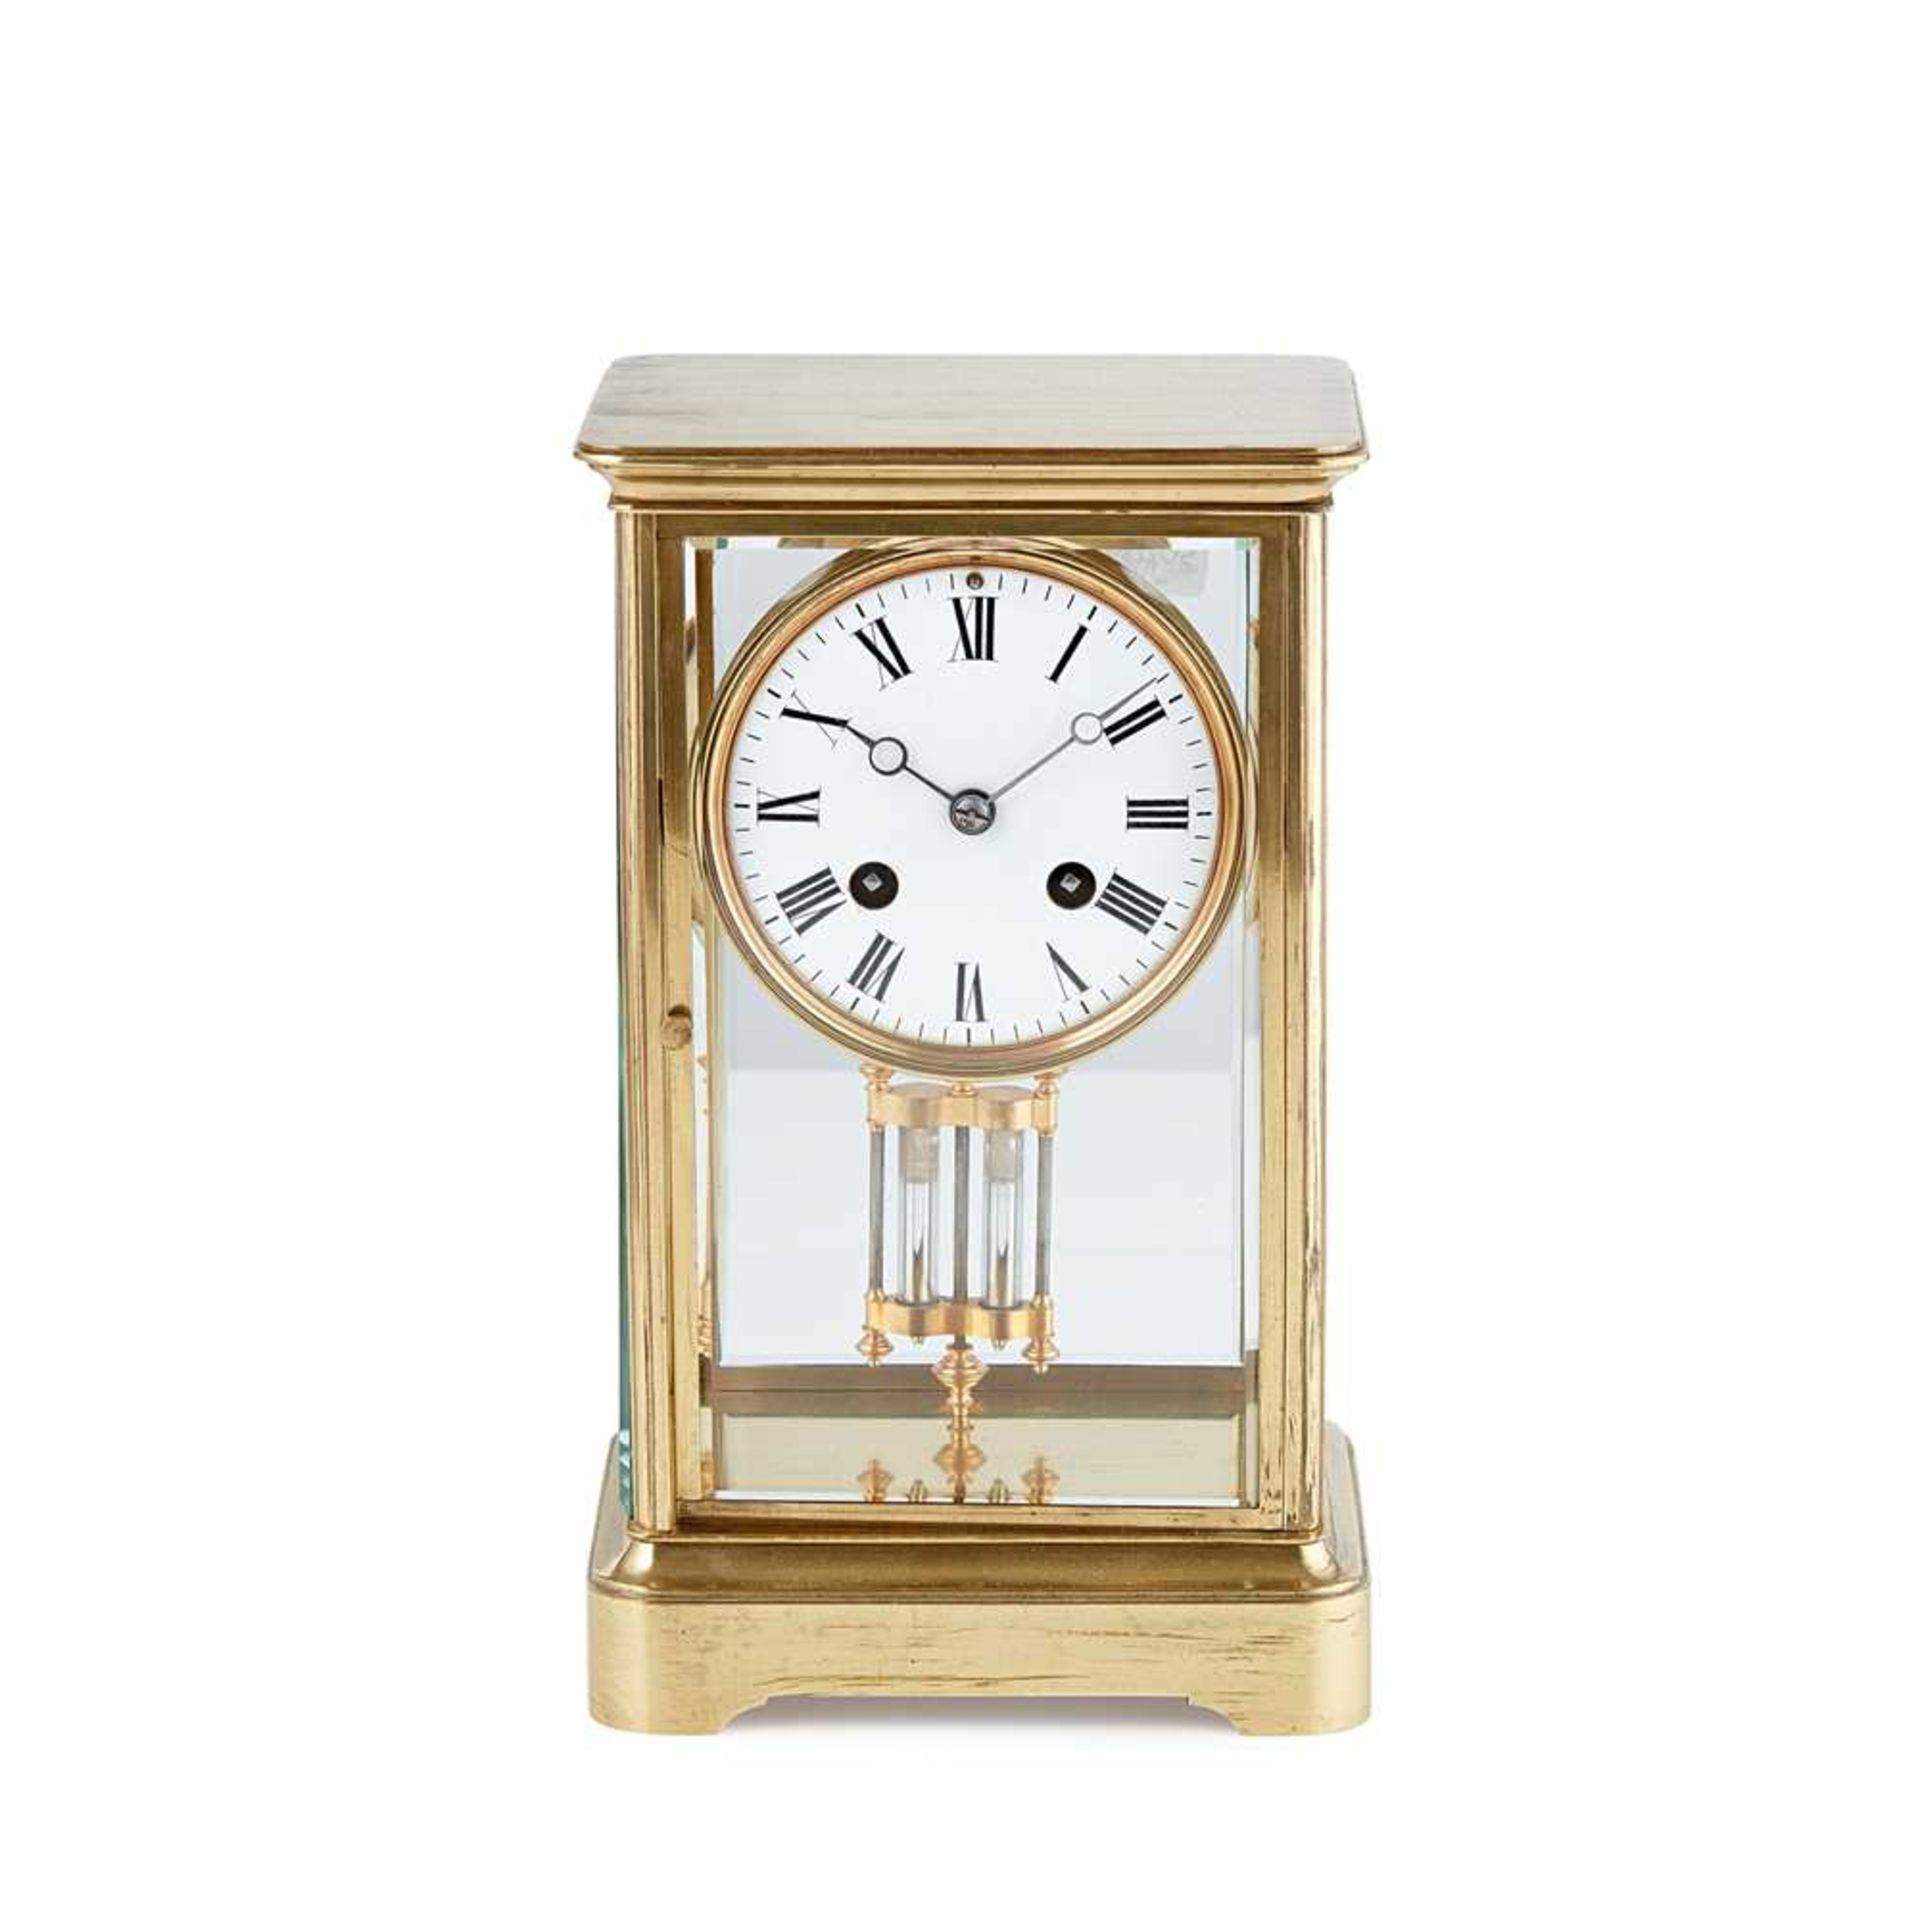 FRENCH BRASS FOUR GLASS MANTEL CLOCK, JAPY FRÈRES & CO. 19TH CENTURY - Image 2 of 10